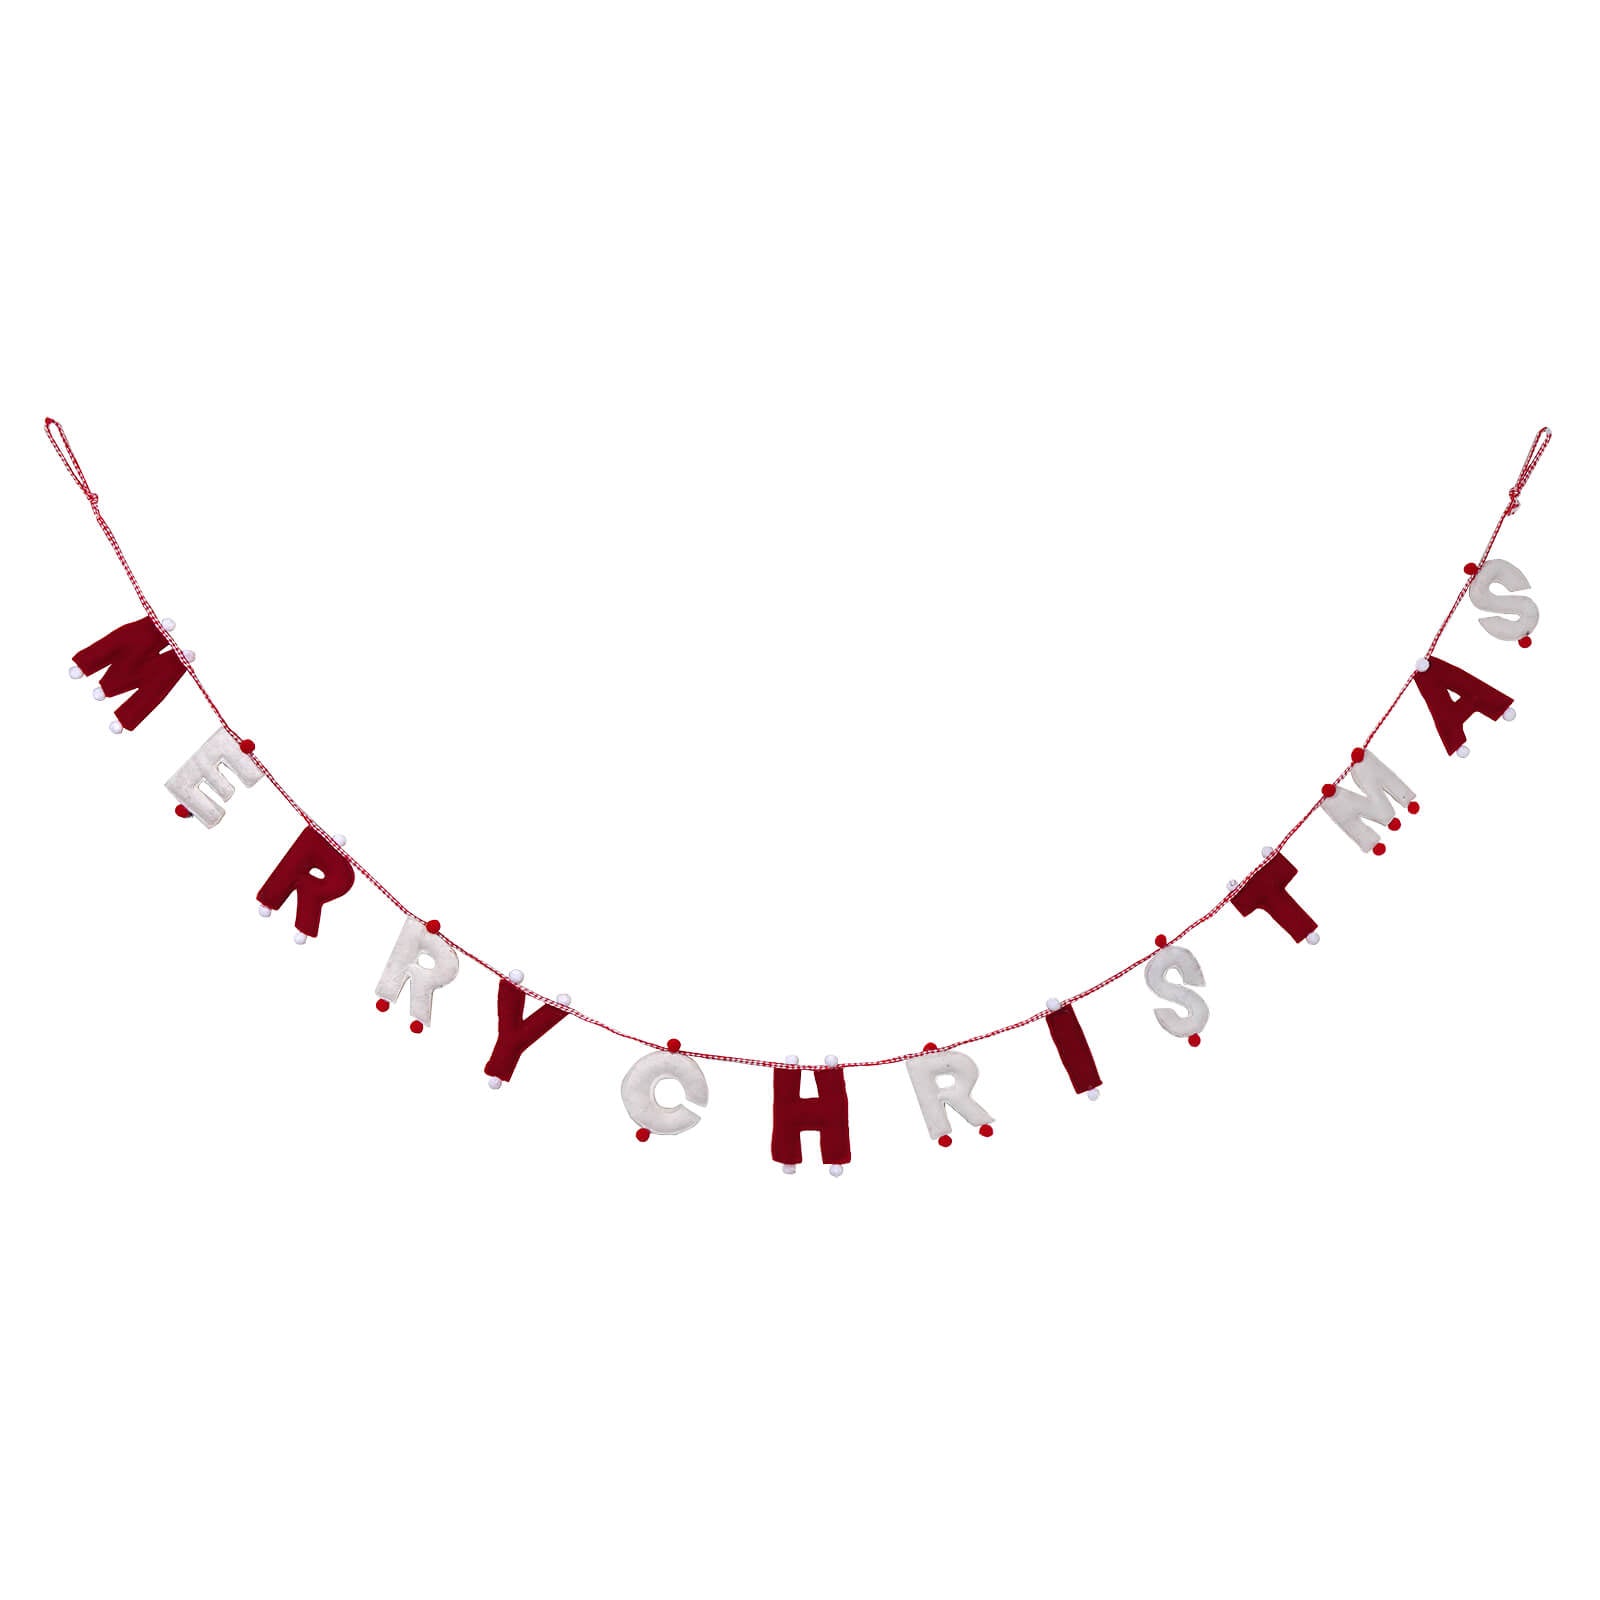 Merry Christmas Fabric Letter Garland